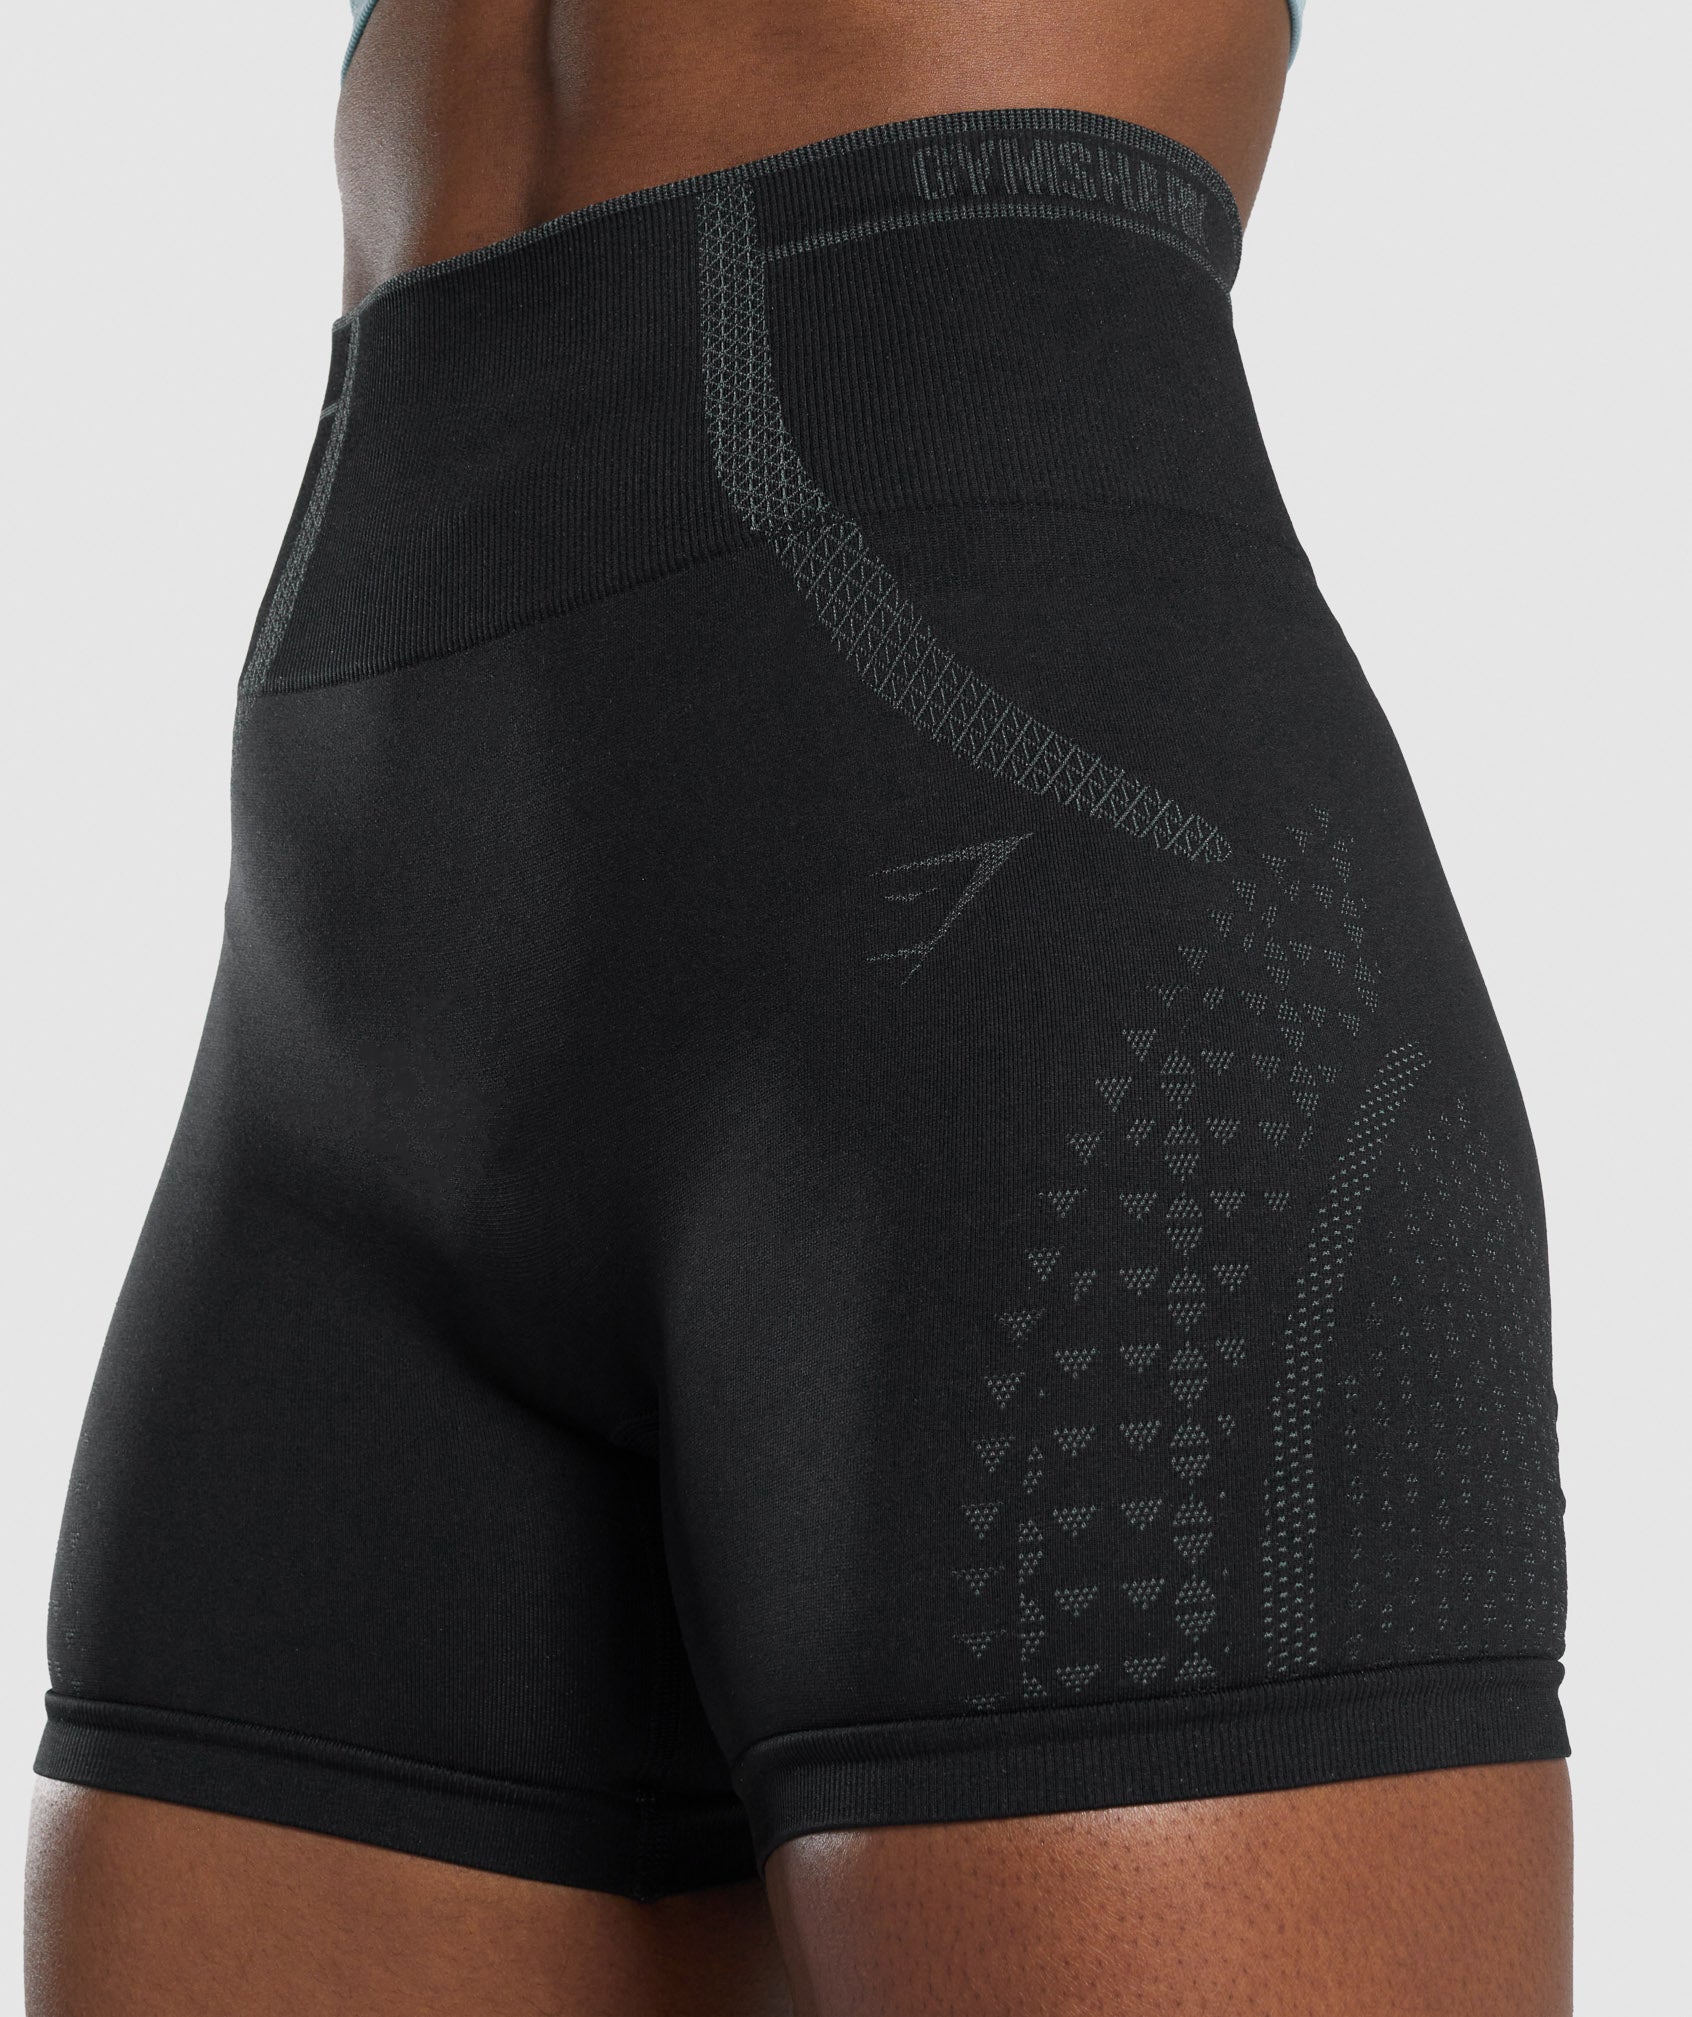 Apex Seamless Shorts in Black/Grey - view 6